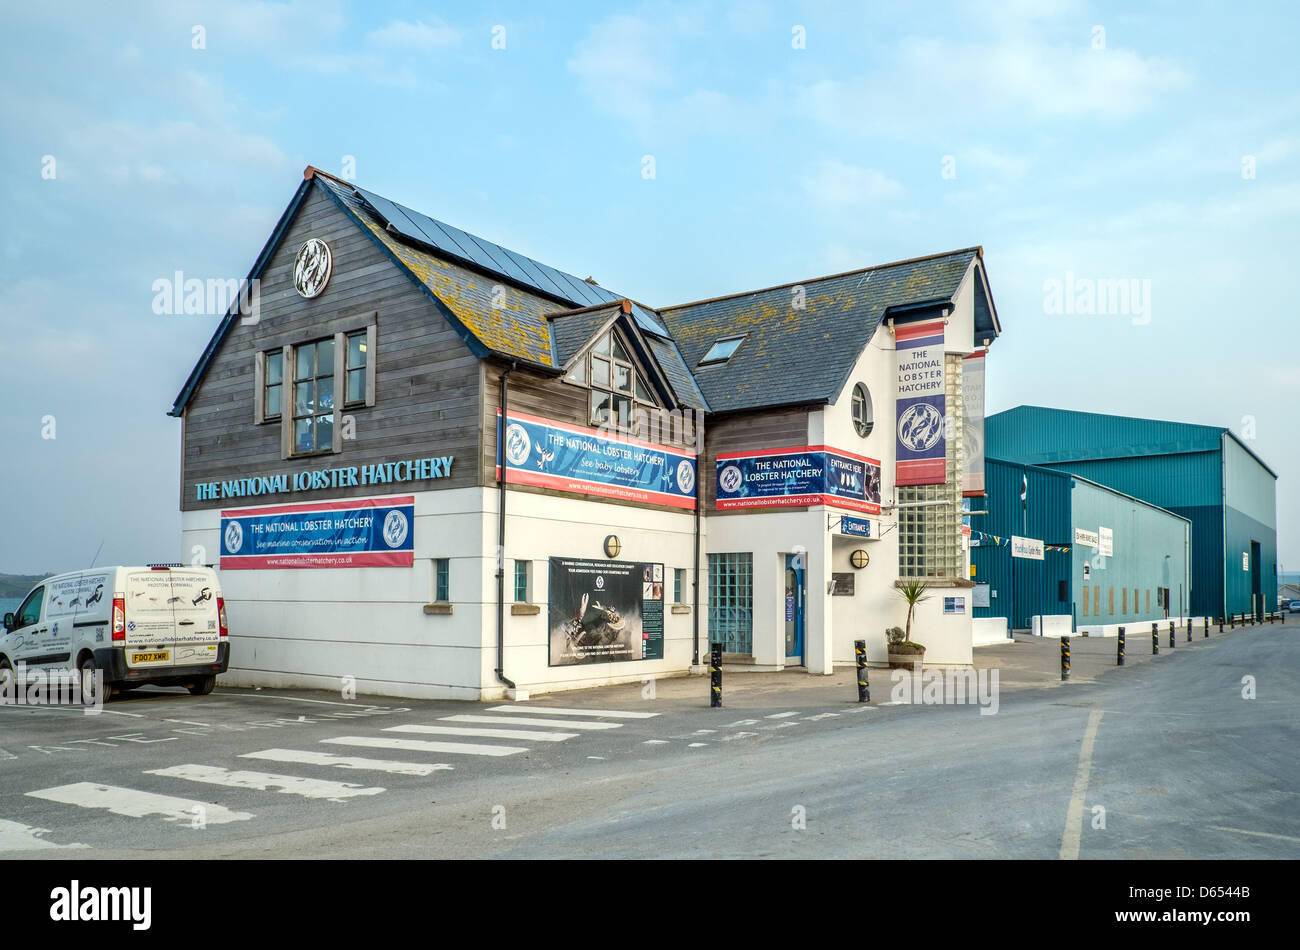 National Lobster Hatchery, Padstow, Cornwall Stock Photo